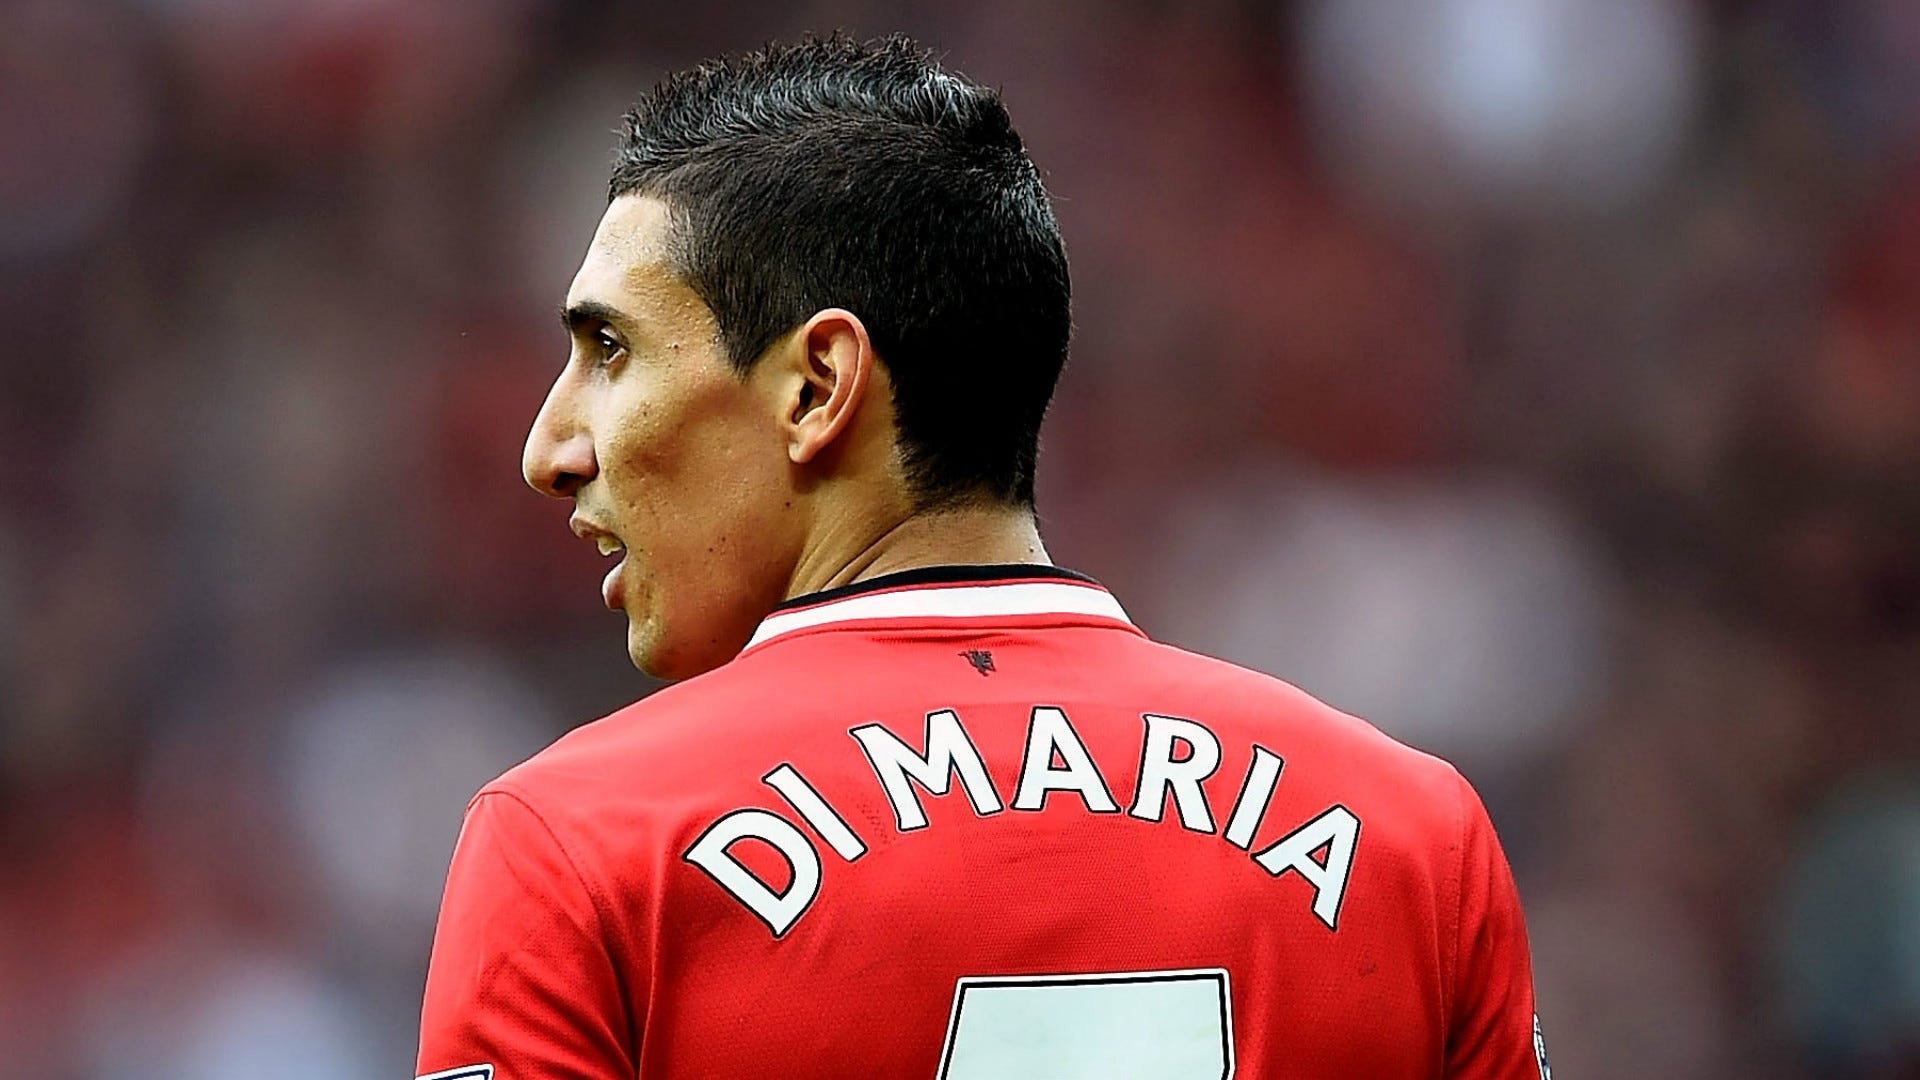 Angel Di Maria to PSG: Manchester United 'offered Gregory van der Wiel' in  potential swap deal with Ligue 1 club, The Independent